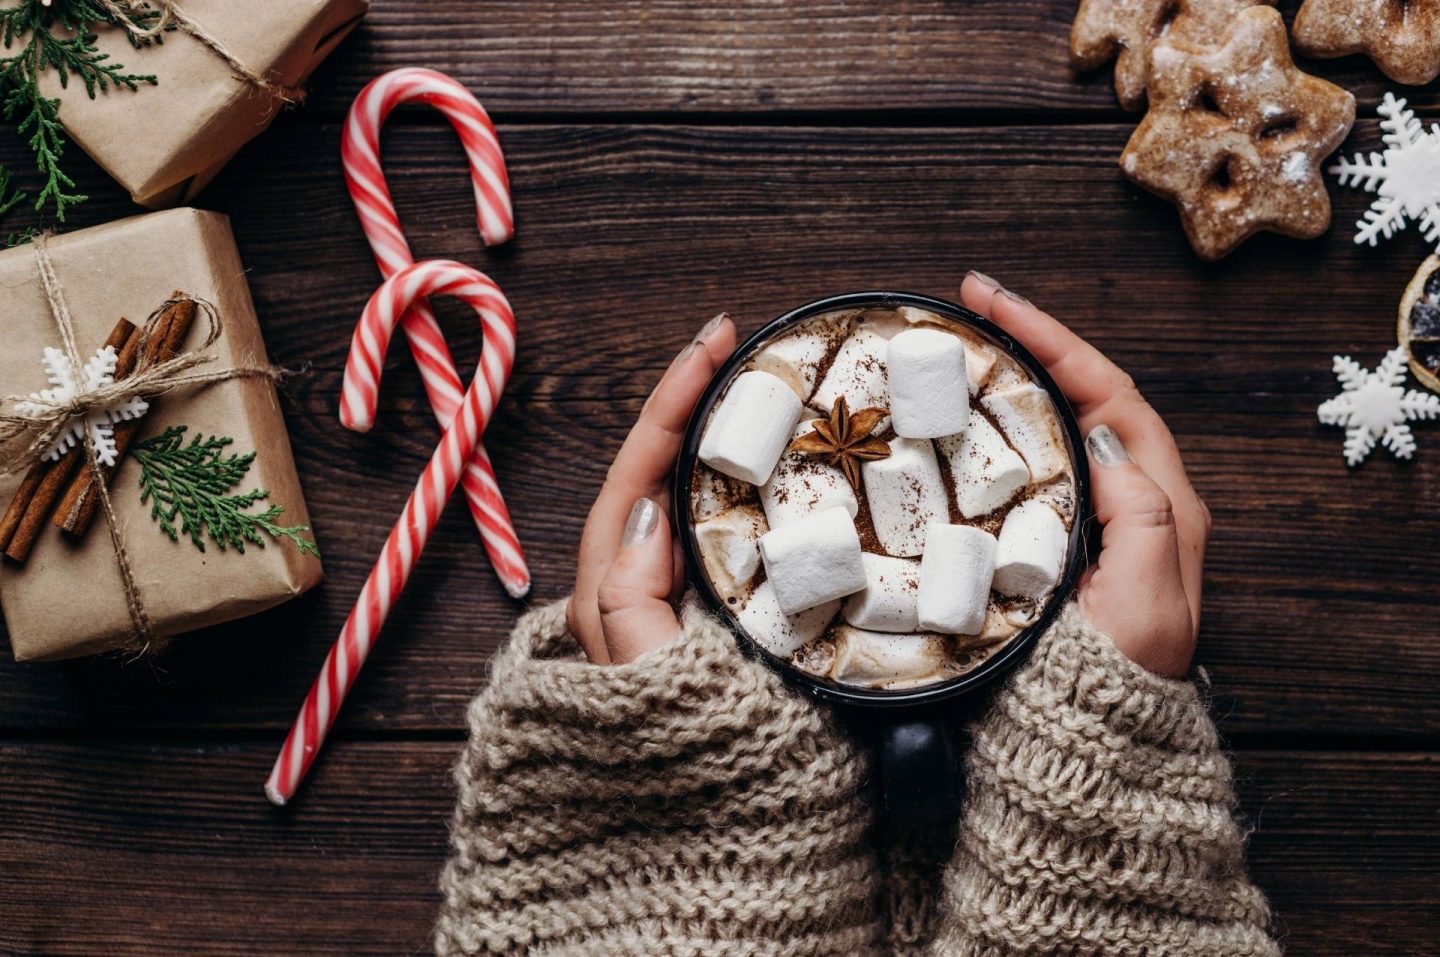 A birds-eye photo of a wooden desk with Christmas things on it, like two candy canes, sugar cookies and wrapped gifts. A woman has her hands wrapped around a mug of hot chocolate with marshmallows.